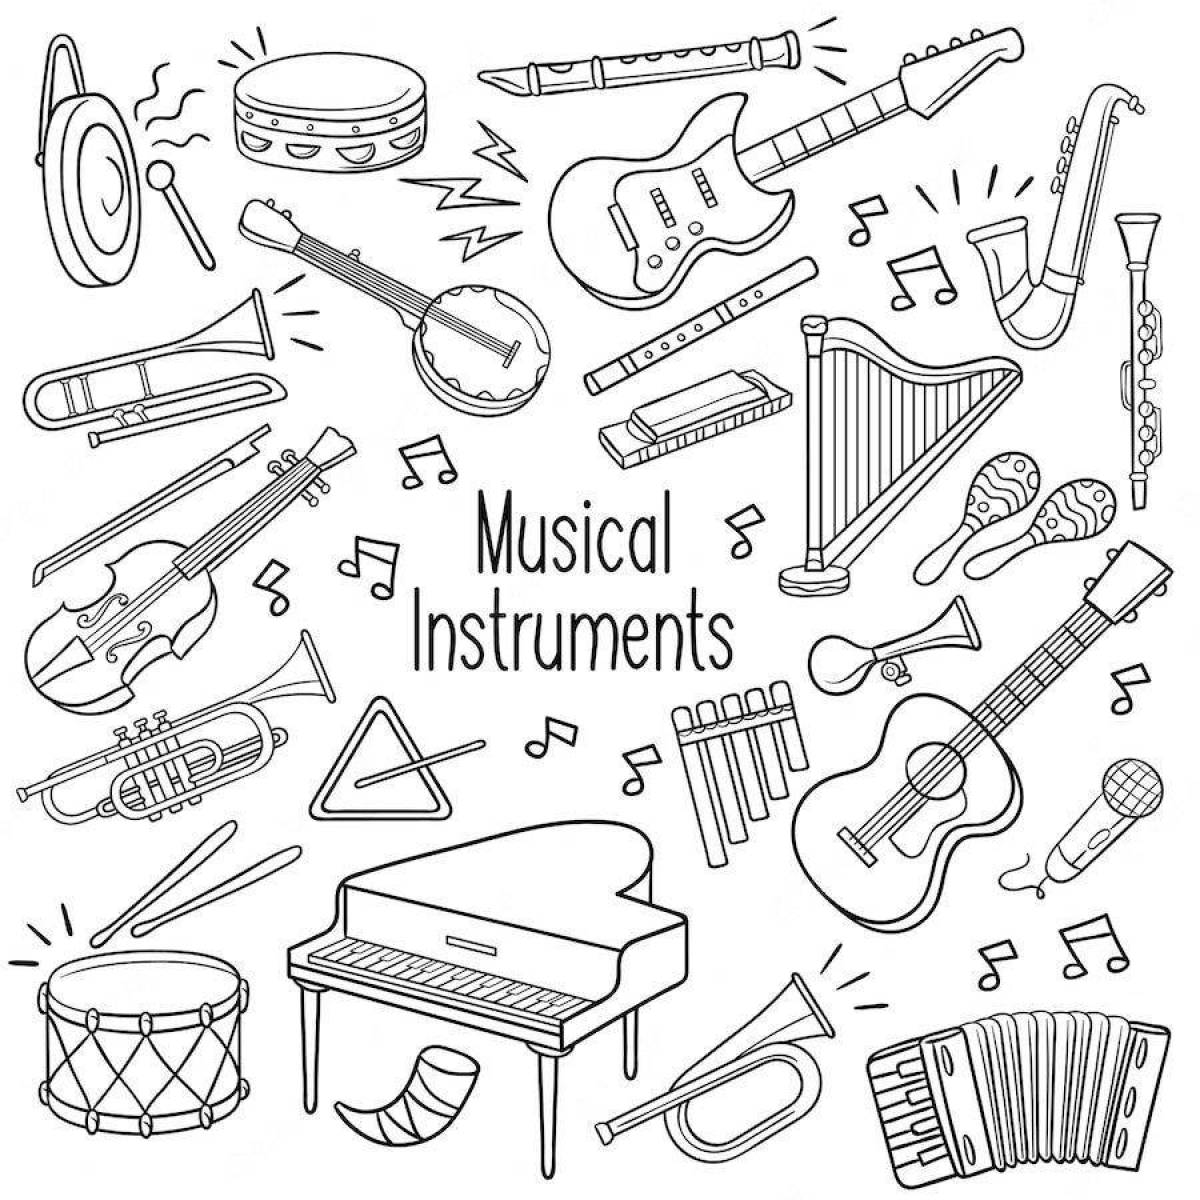 Wonderful musical instruments coloring 1st grade